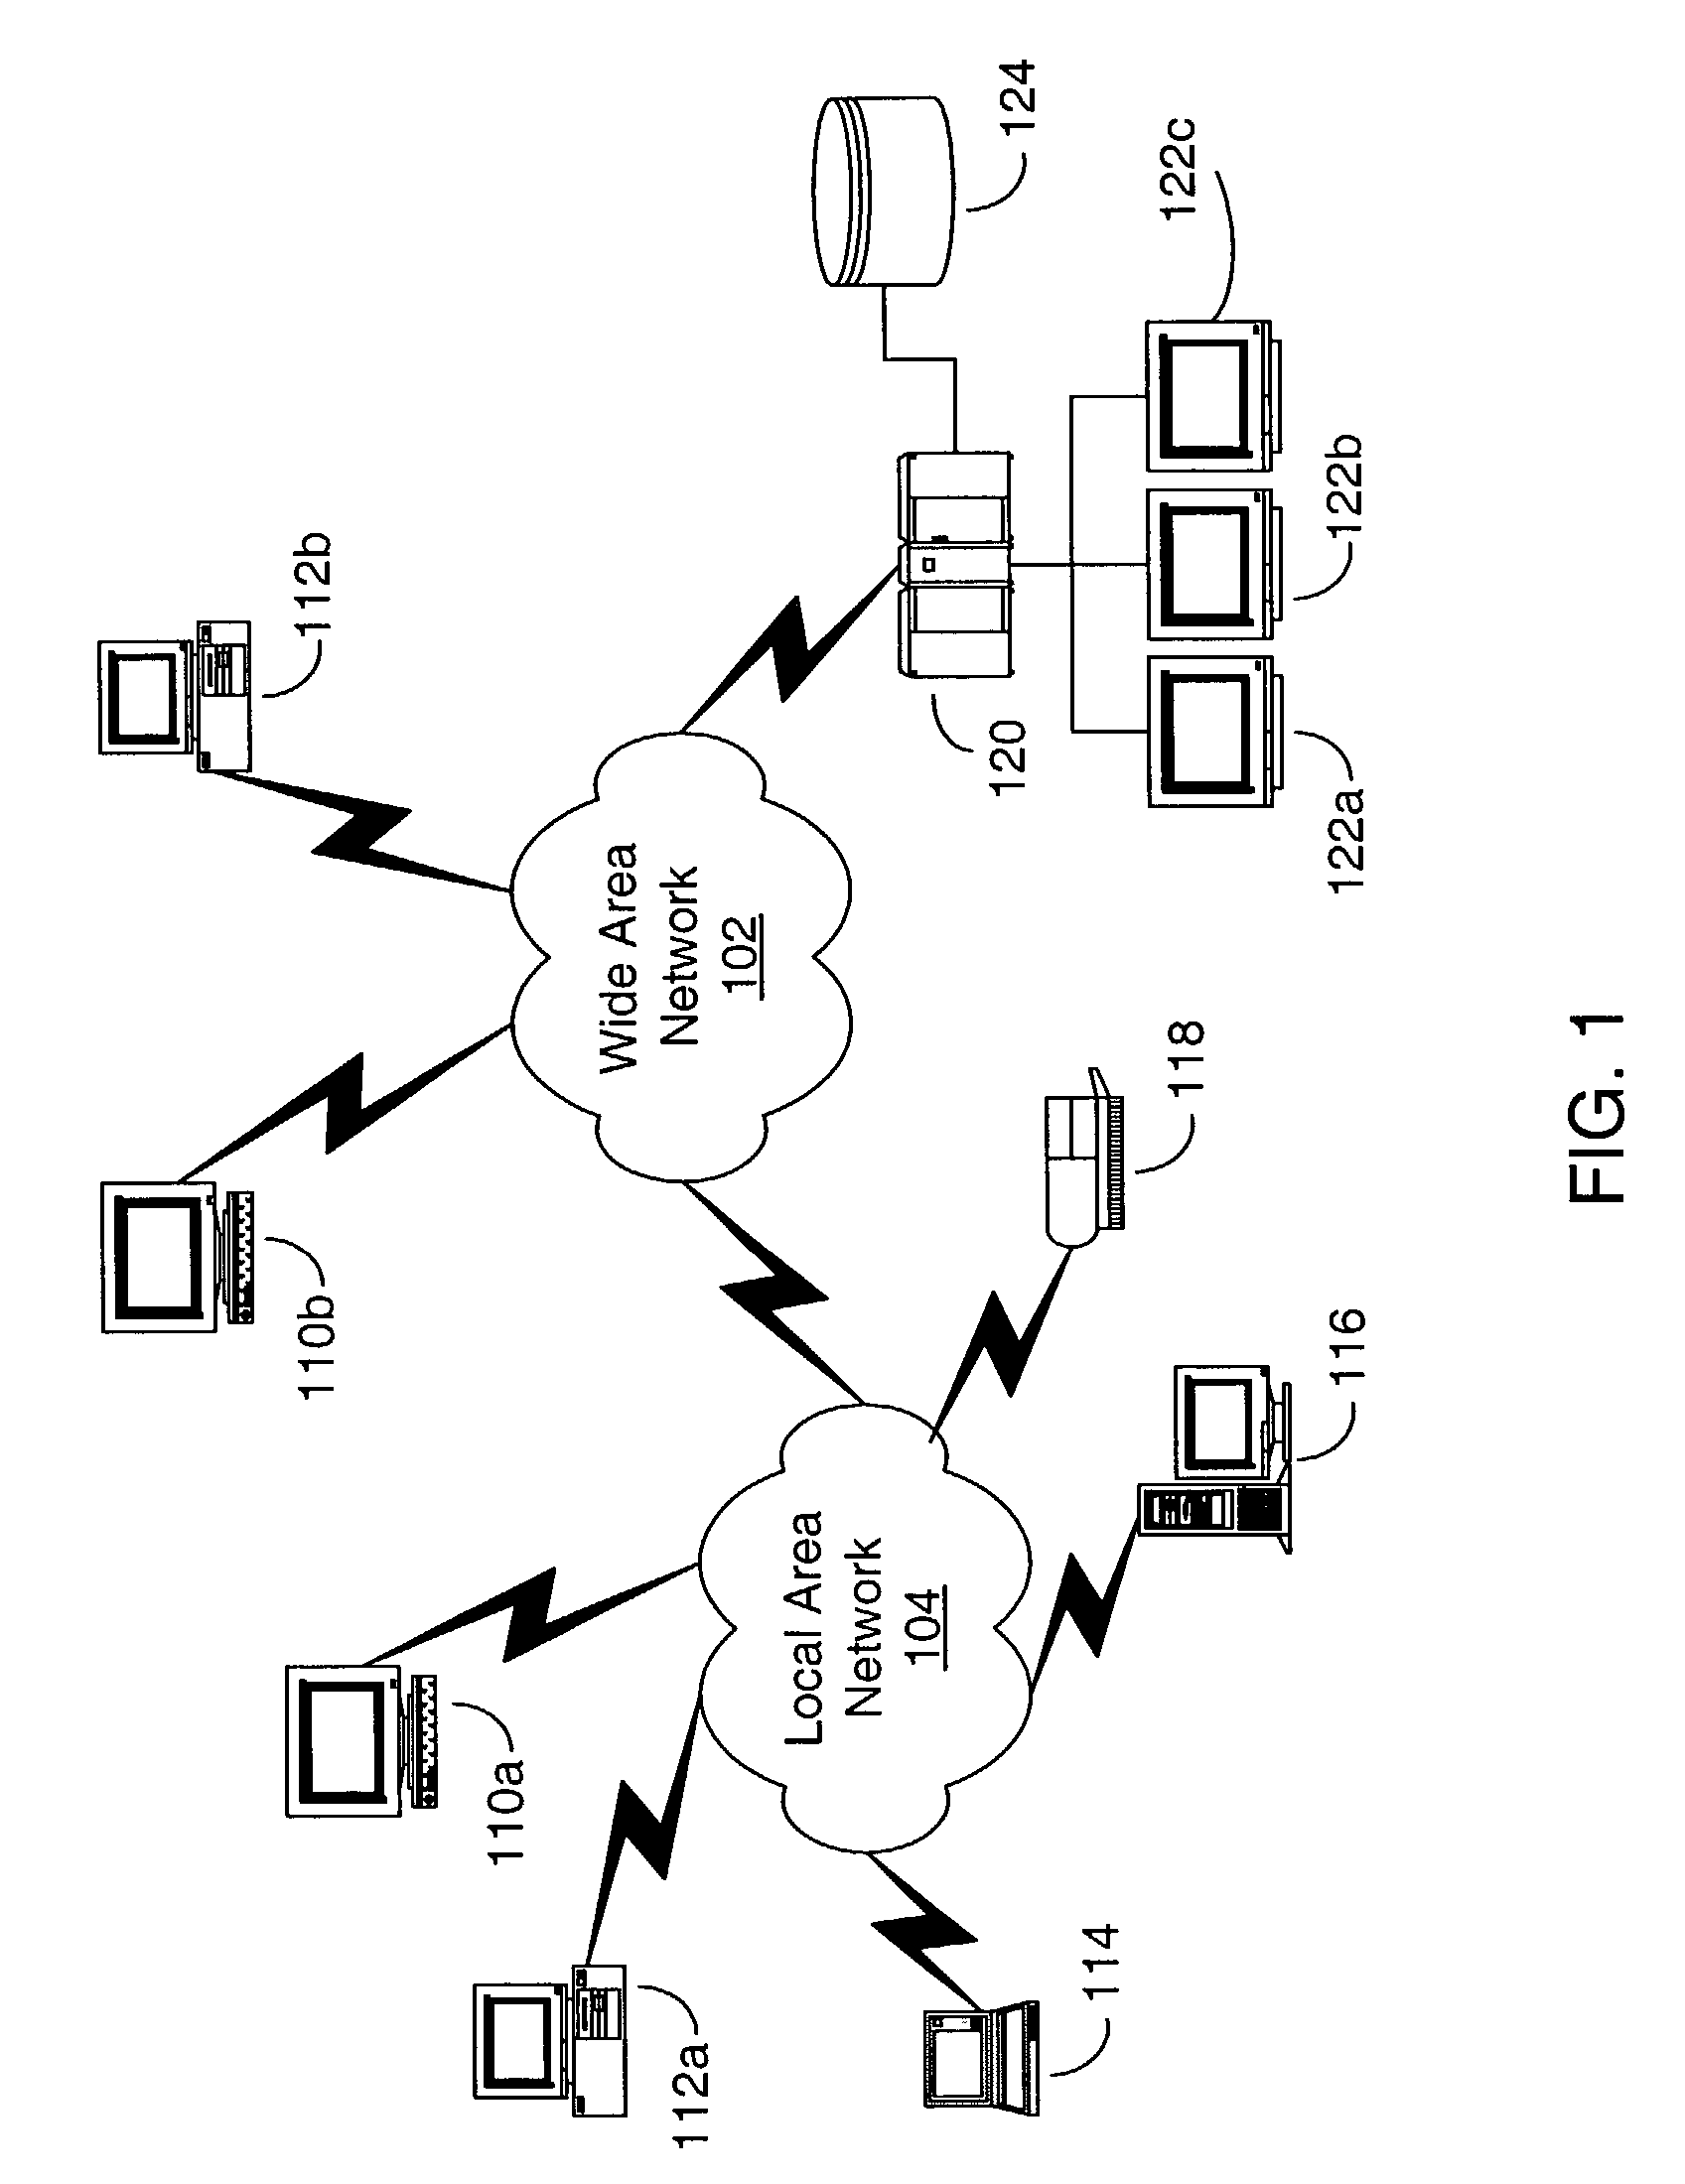 System and method for enumerating arbitrary hyperlinked structures in which links may be dynamically calculable